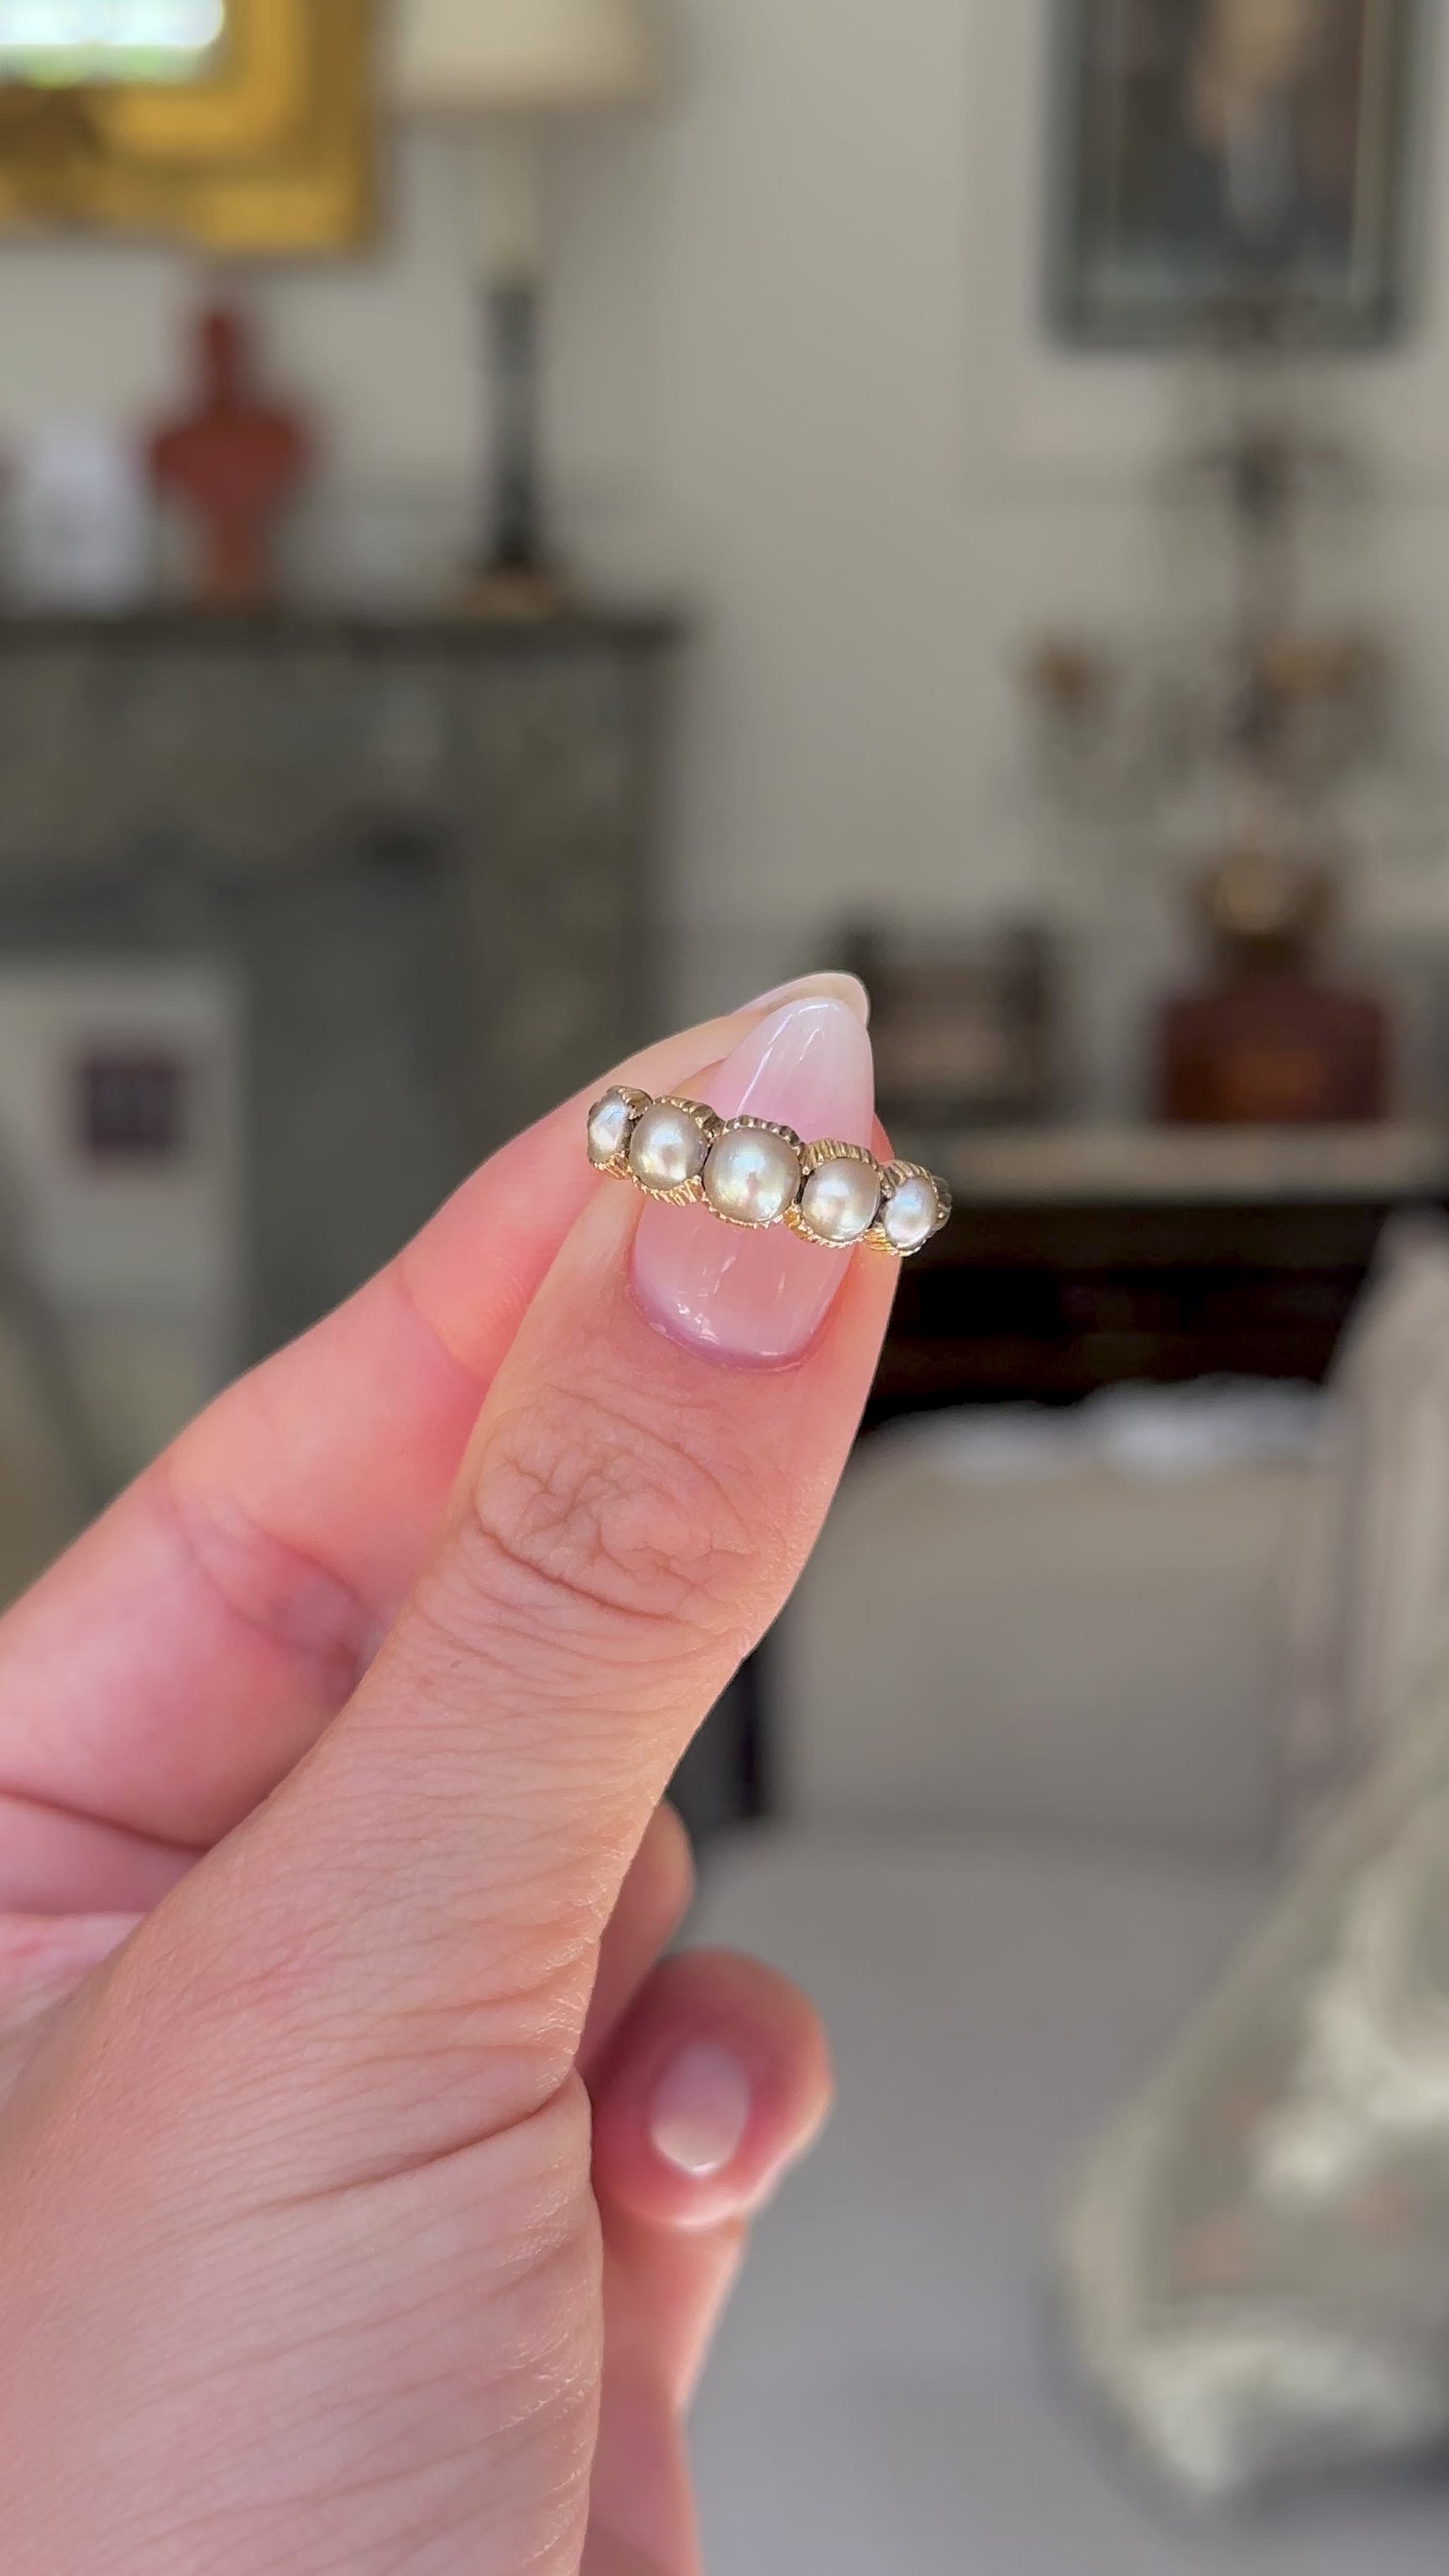 antique georgian pearl half hoop ring held in fingers and rotated to give perspective, front view.